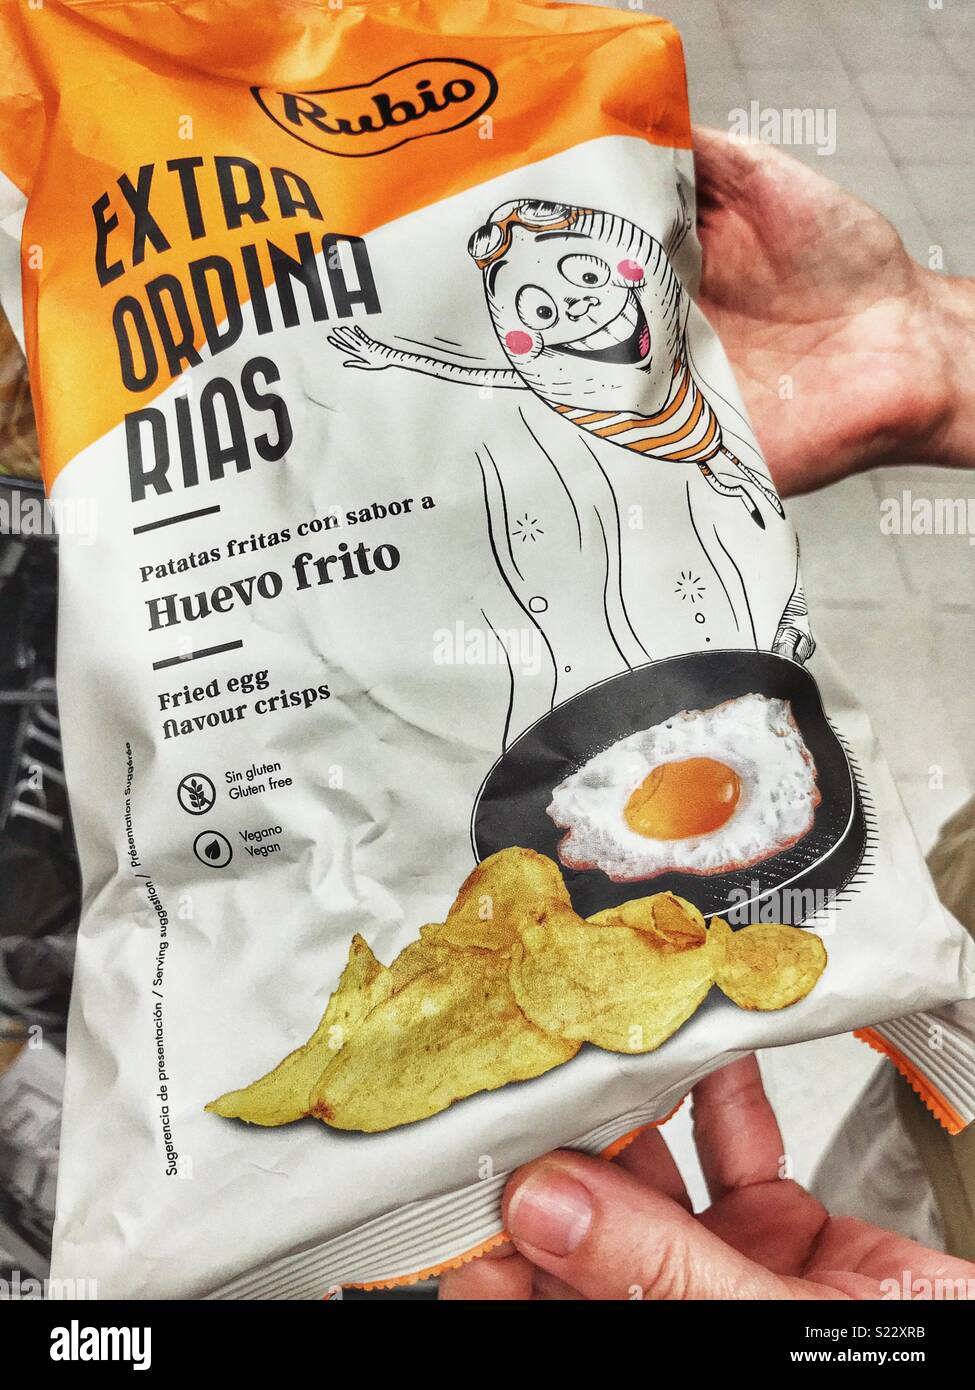 Woman holding a bag of Fried egg flavour crisps in a Spanish supermarket Stock Photo